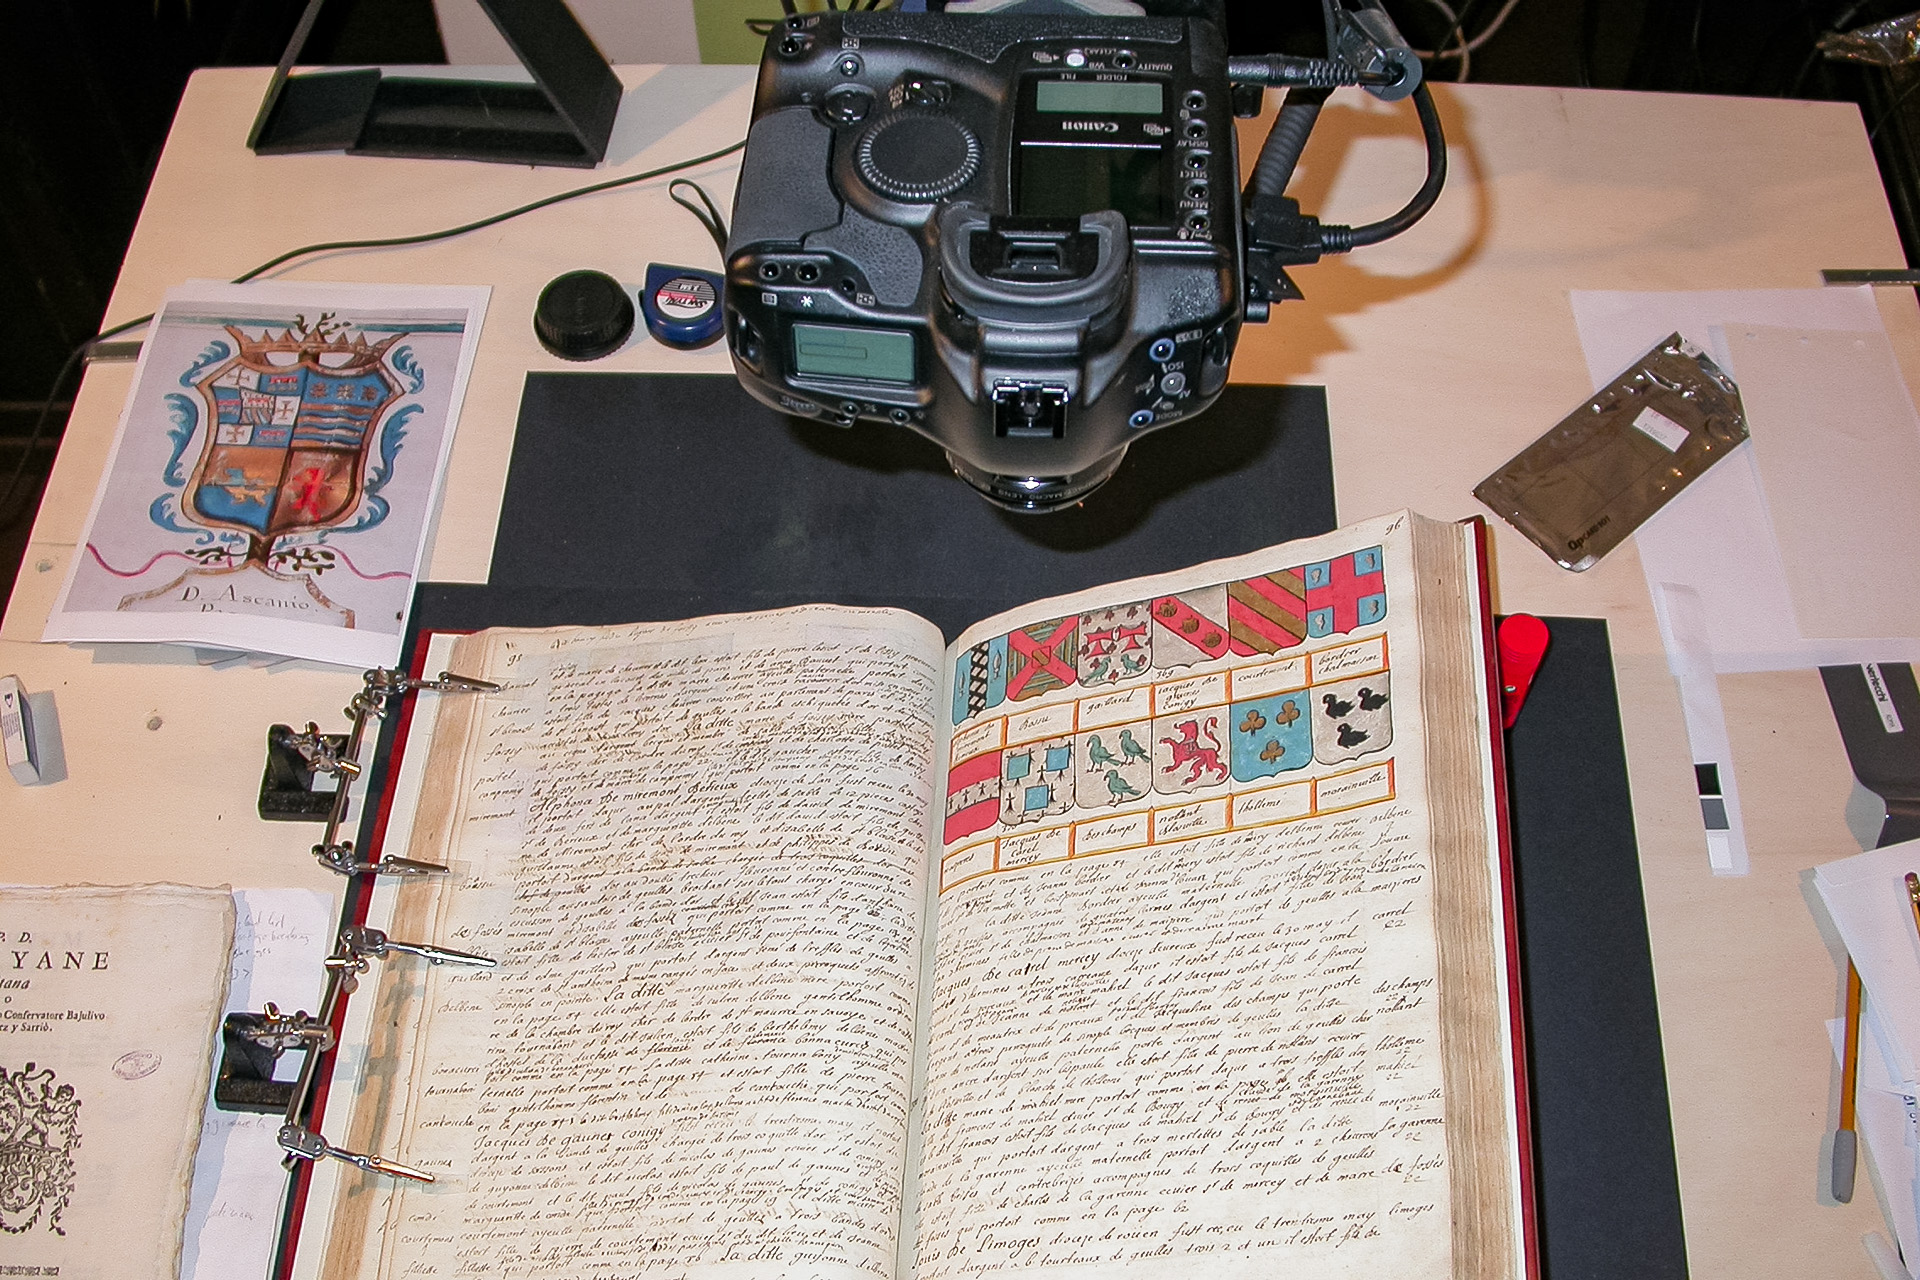 The digitisation of the magistral palace archives is launched